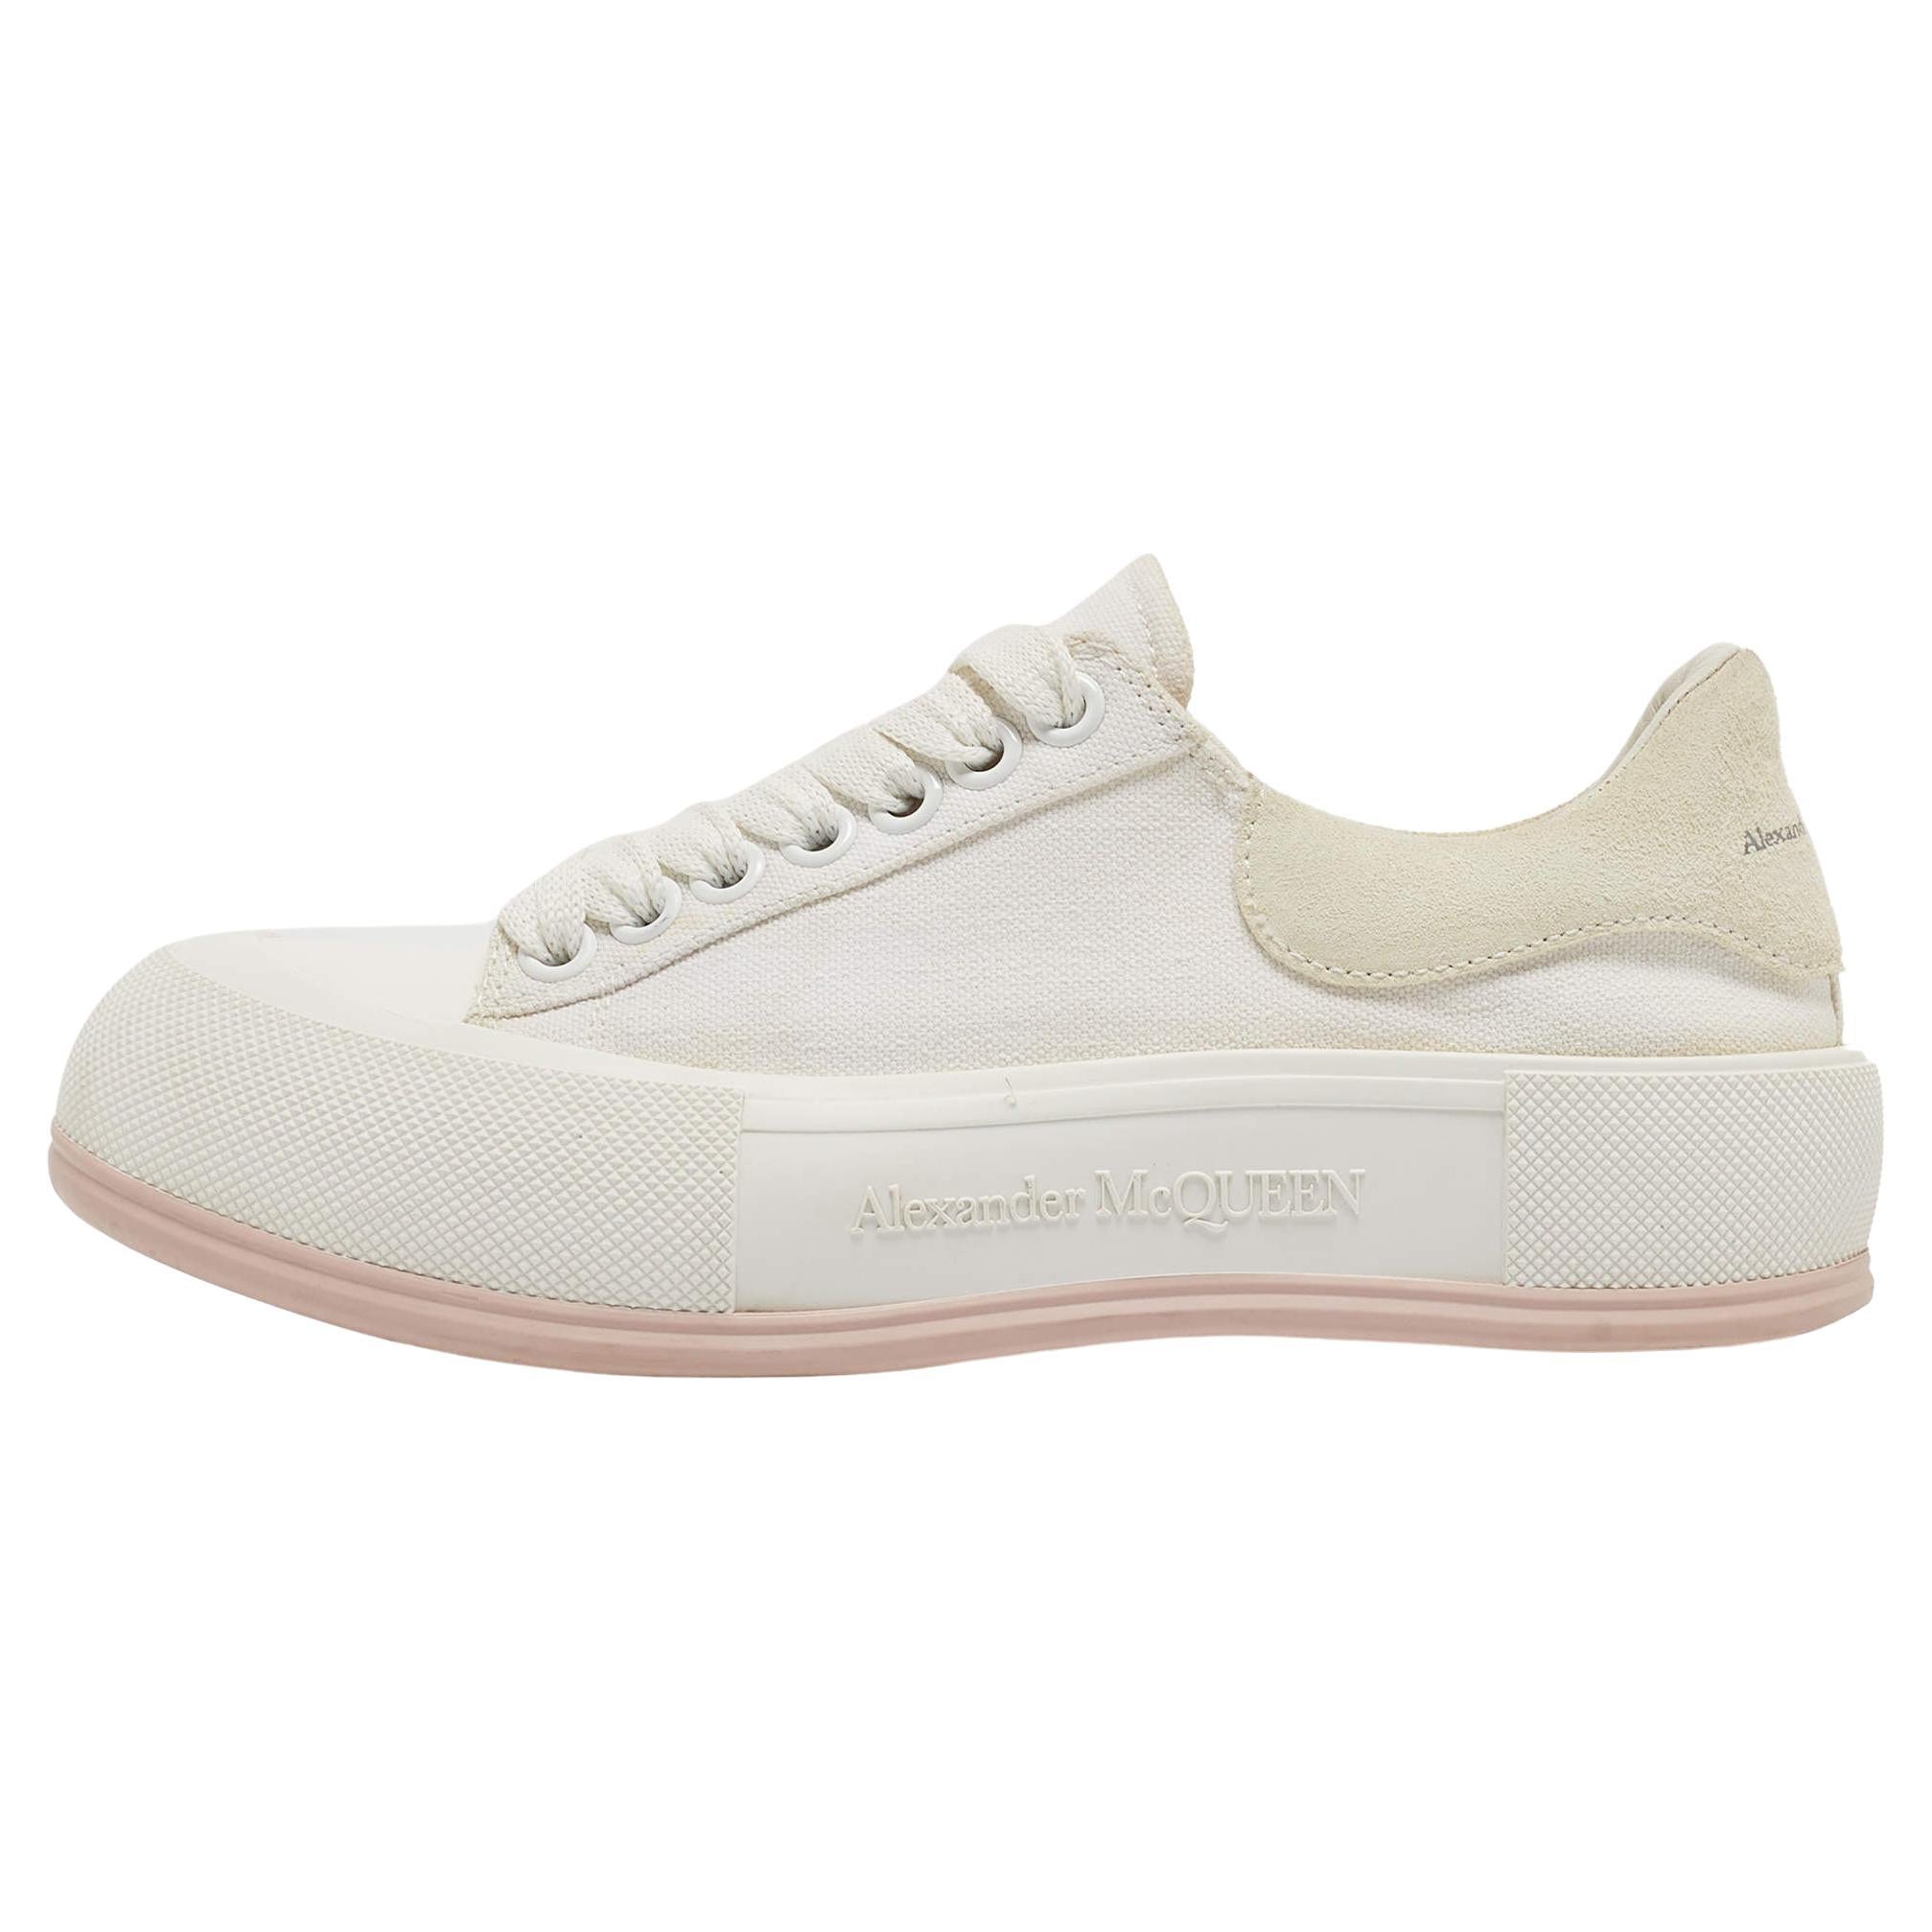 Alexander McQueen White/Grey Suede and Canvas Low Top Sneakers Size 37 For Sale